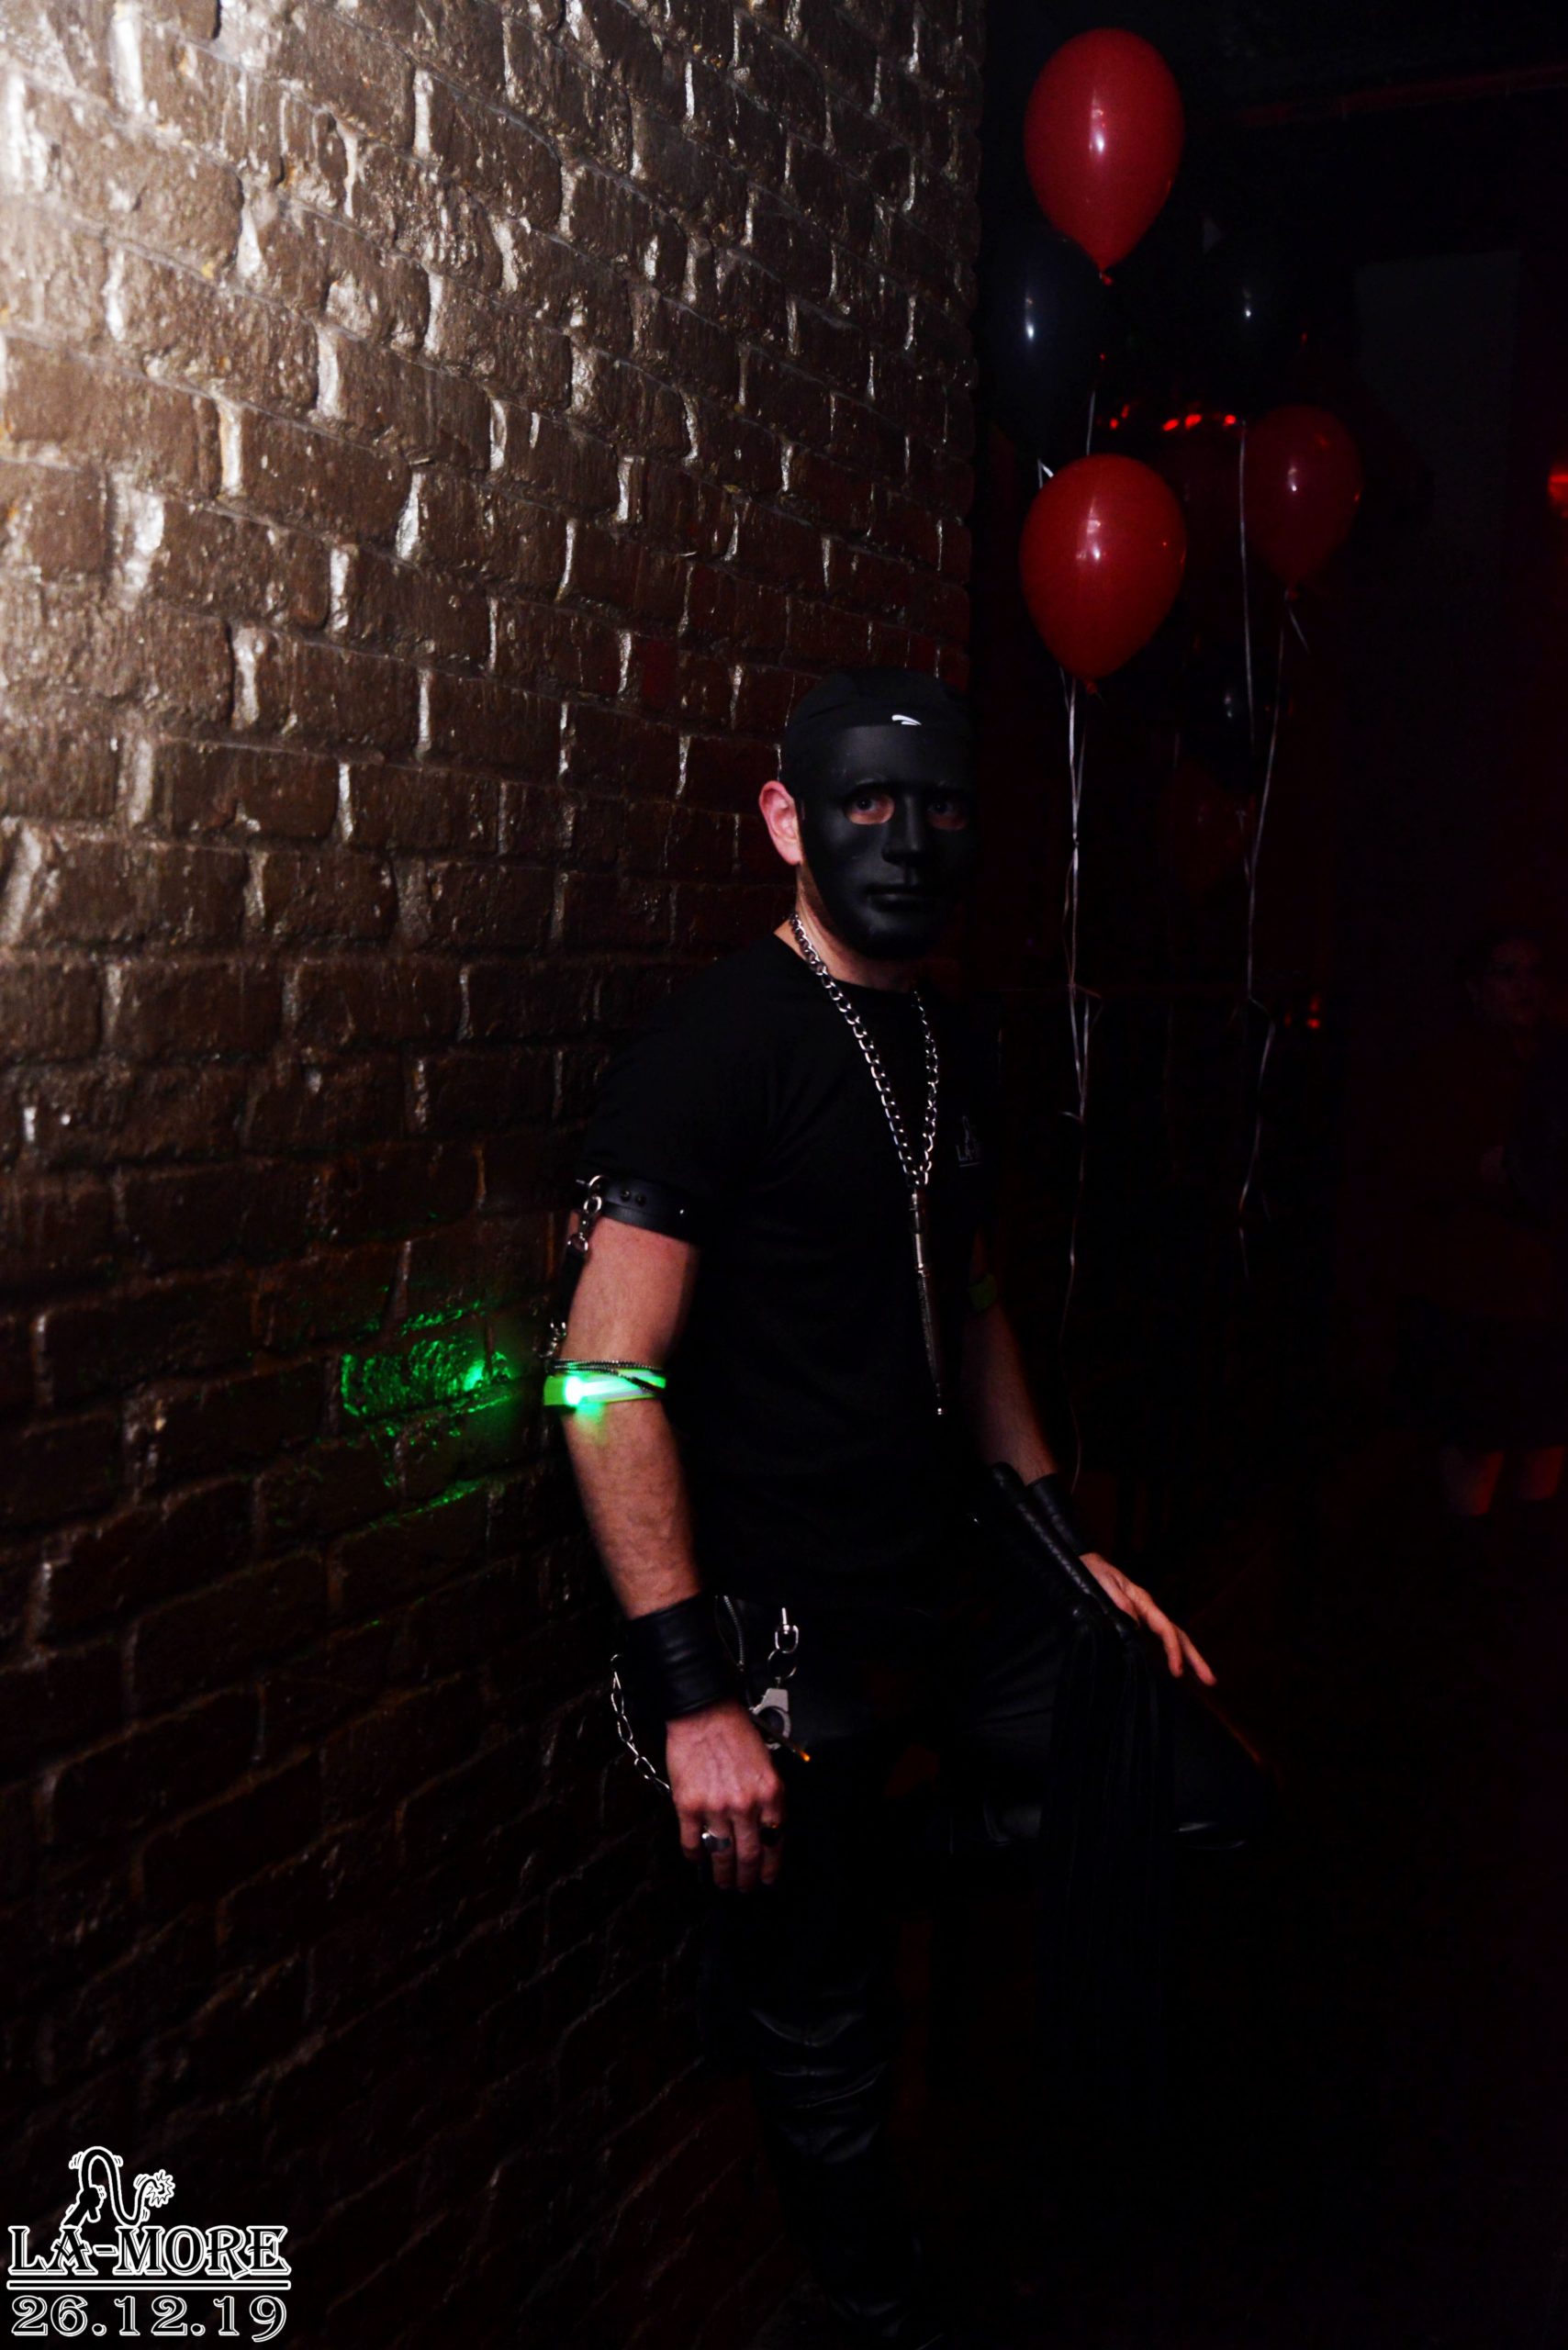 Fetish And Bdsm Parties Gallery The Largest Bdsm Line In The Country La More